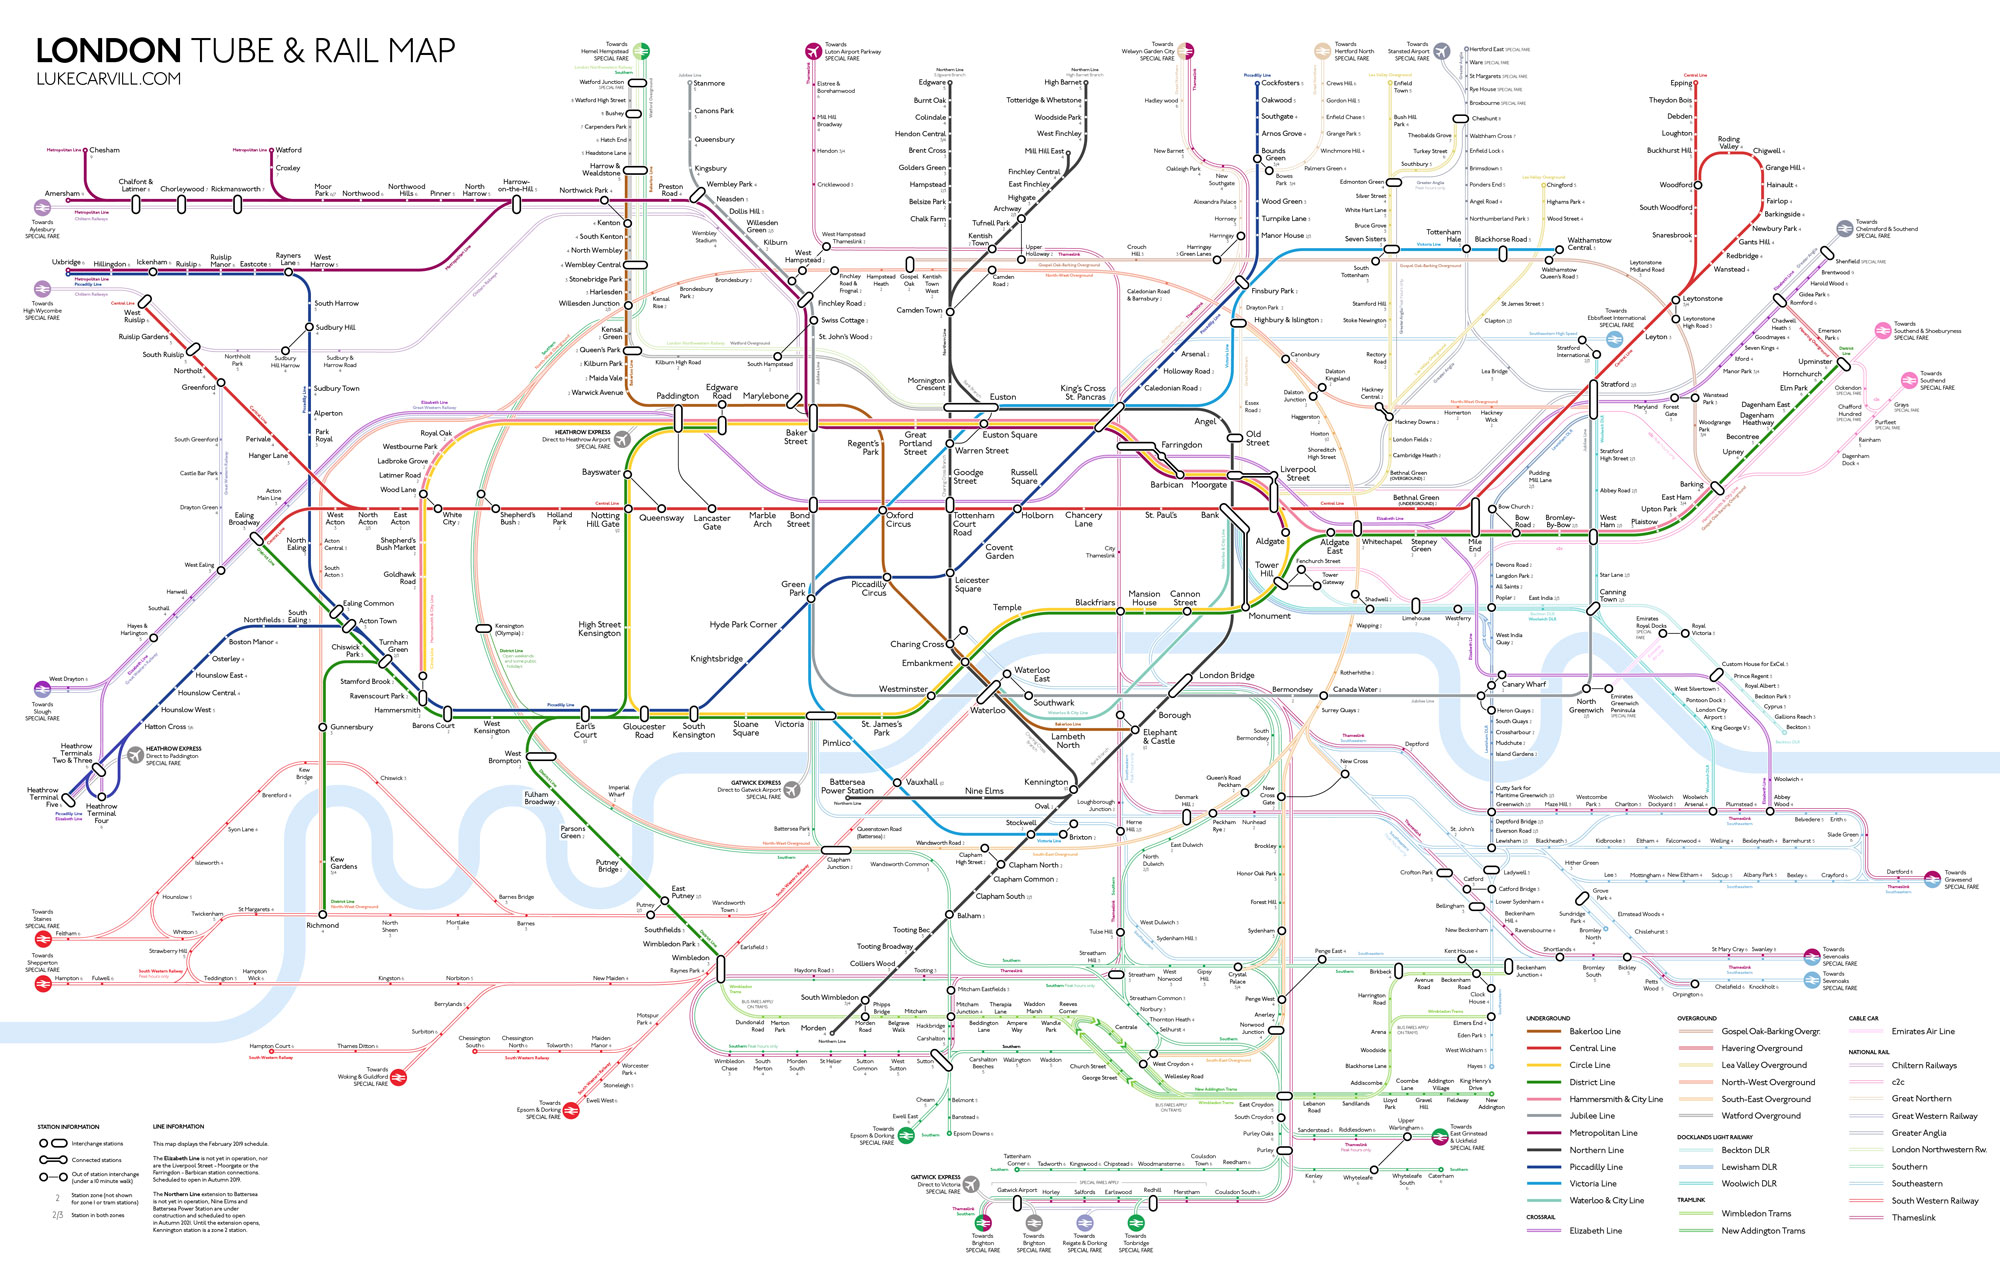 The iconic London Underground map could be getting a major redesign ...